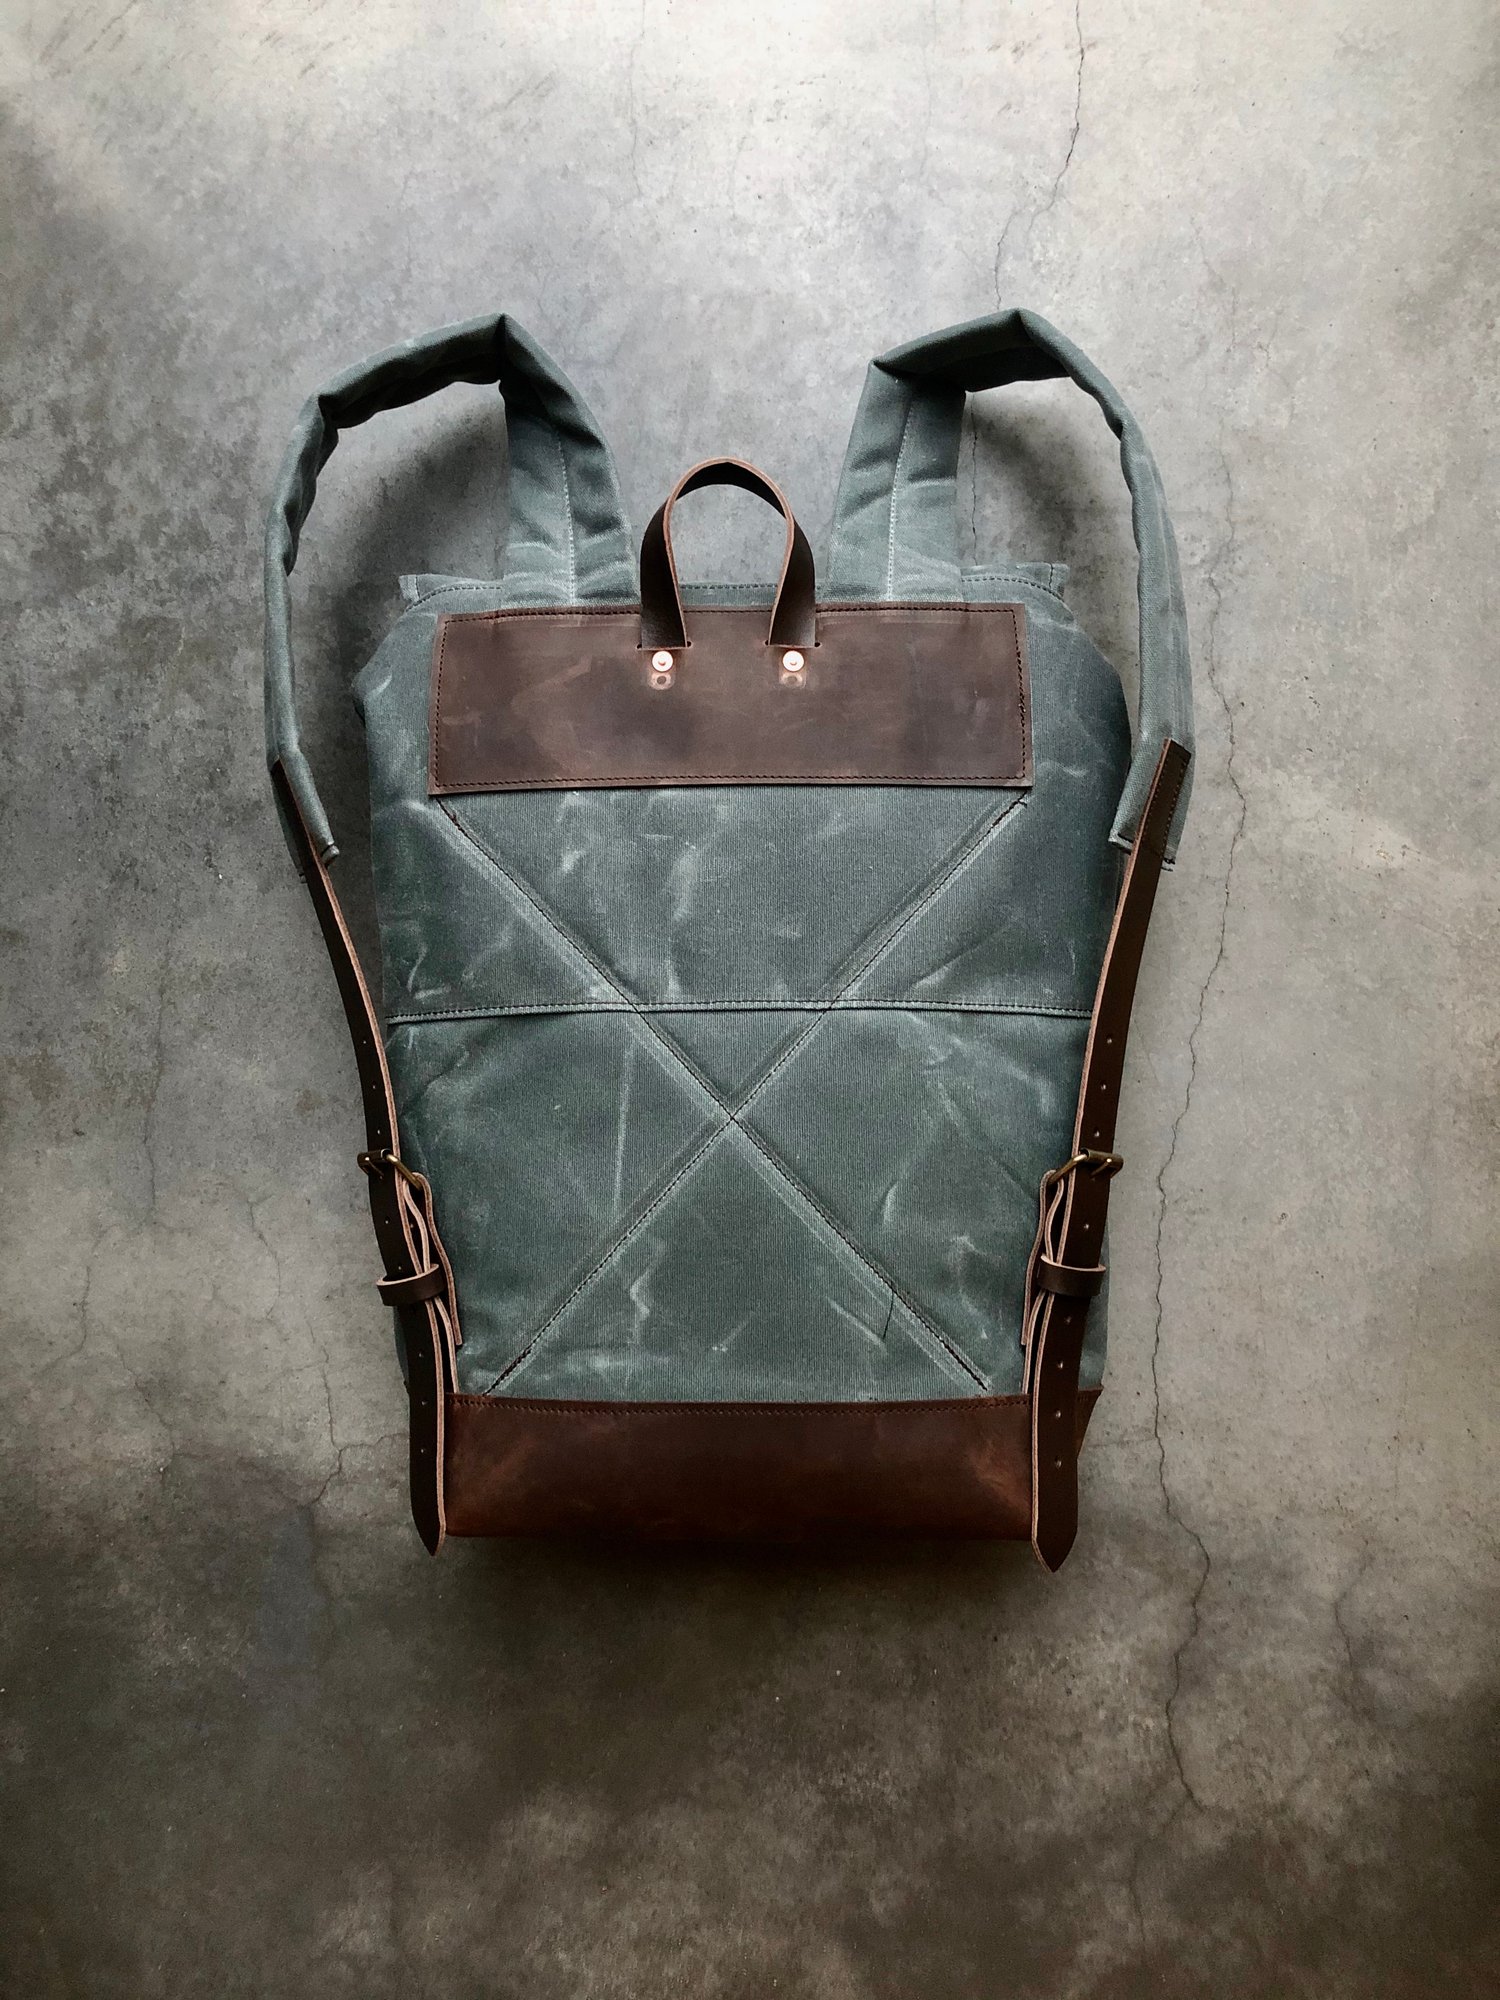 Image of Backpack in gray waxed canvas / rucksack with folded top and waxed canvas flap